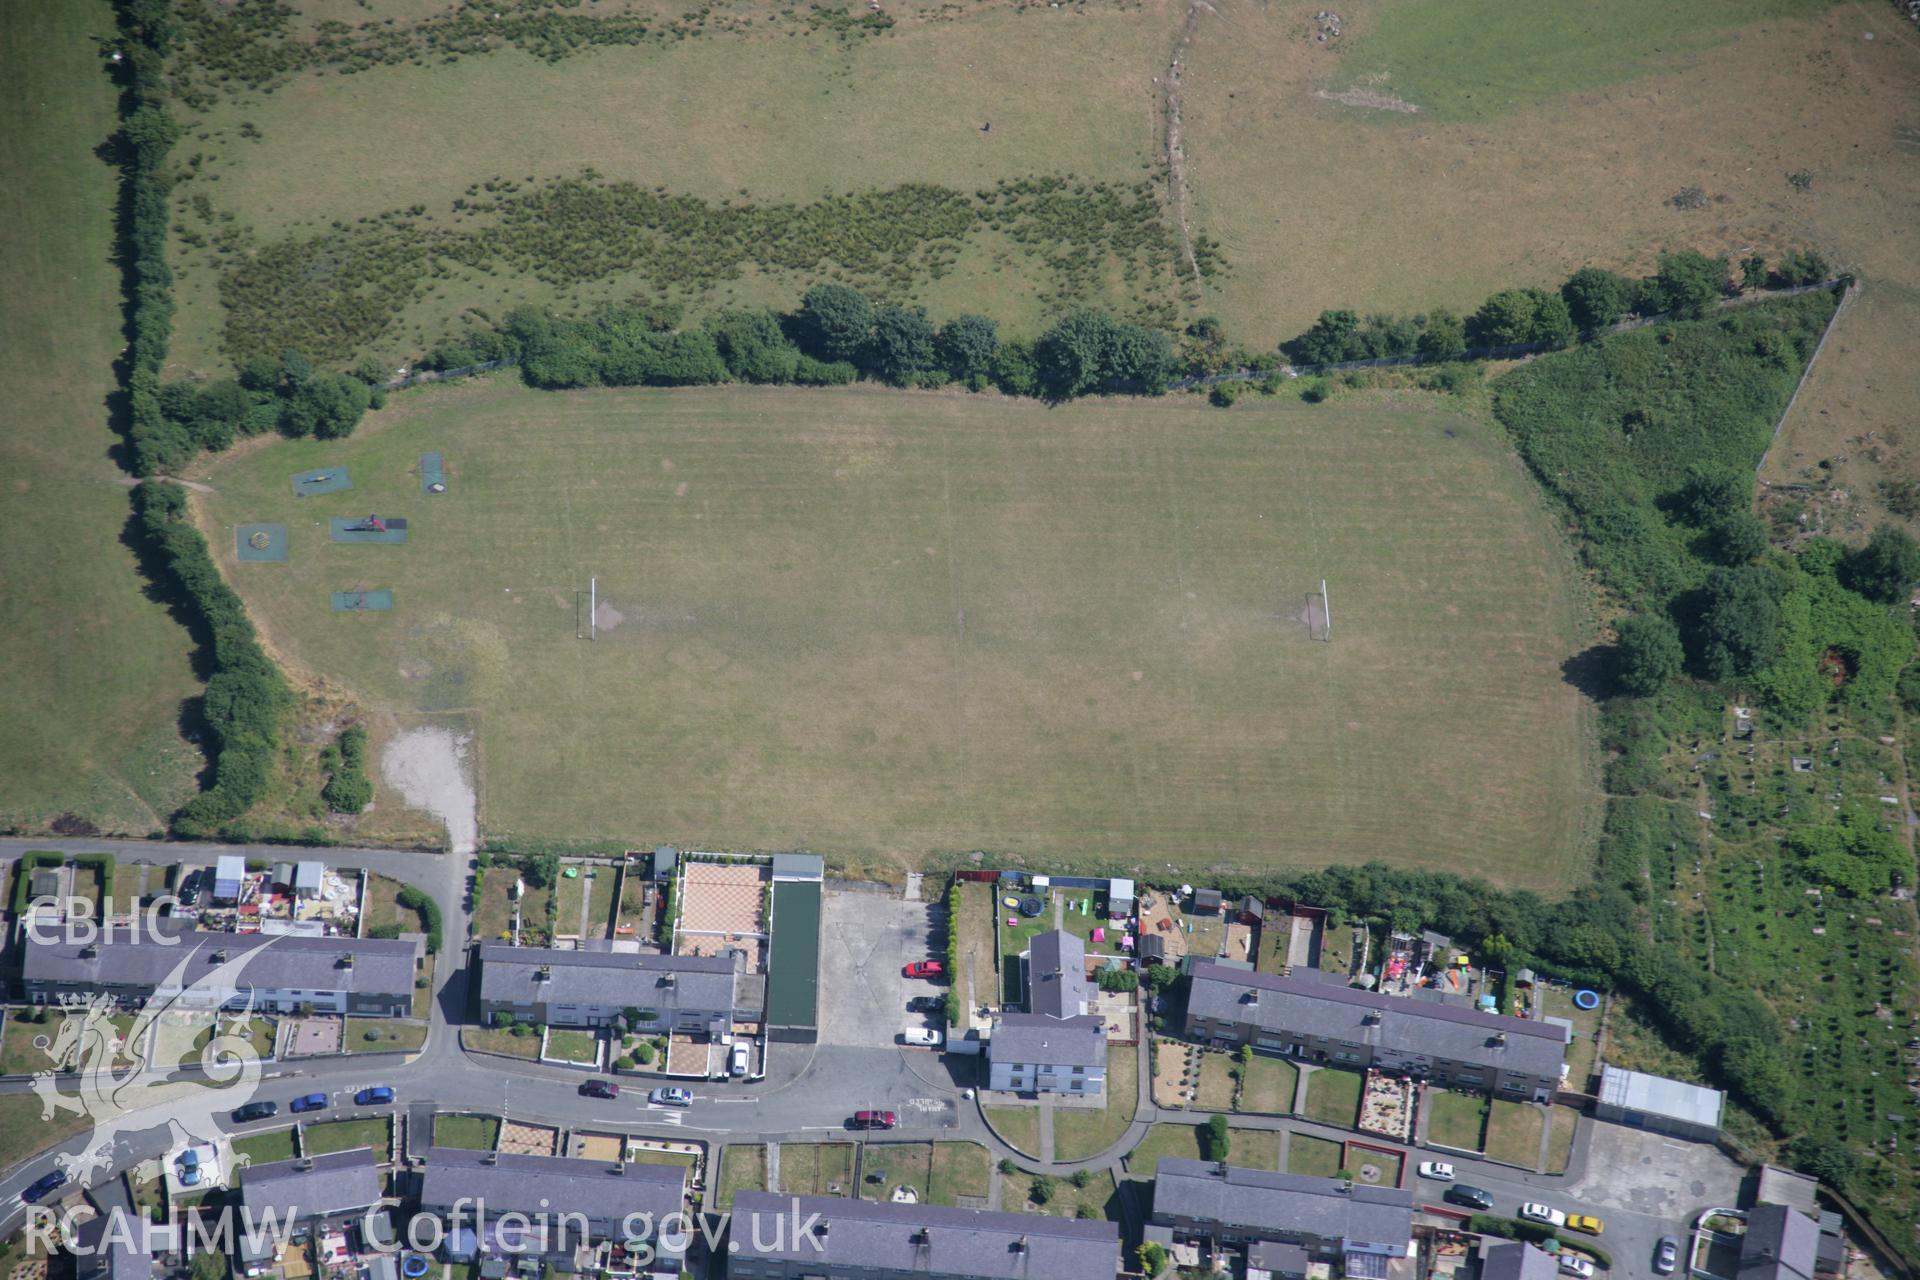 RCAHMW colour oblique aerial photograph of the Tyddyn Pandy Square Barrow Cemetery. Taken on 25 July 2006 by Toby Driver.